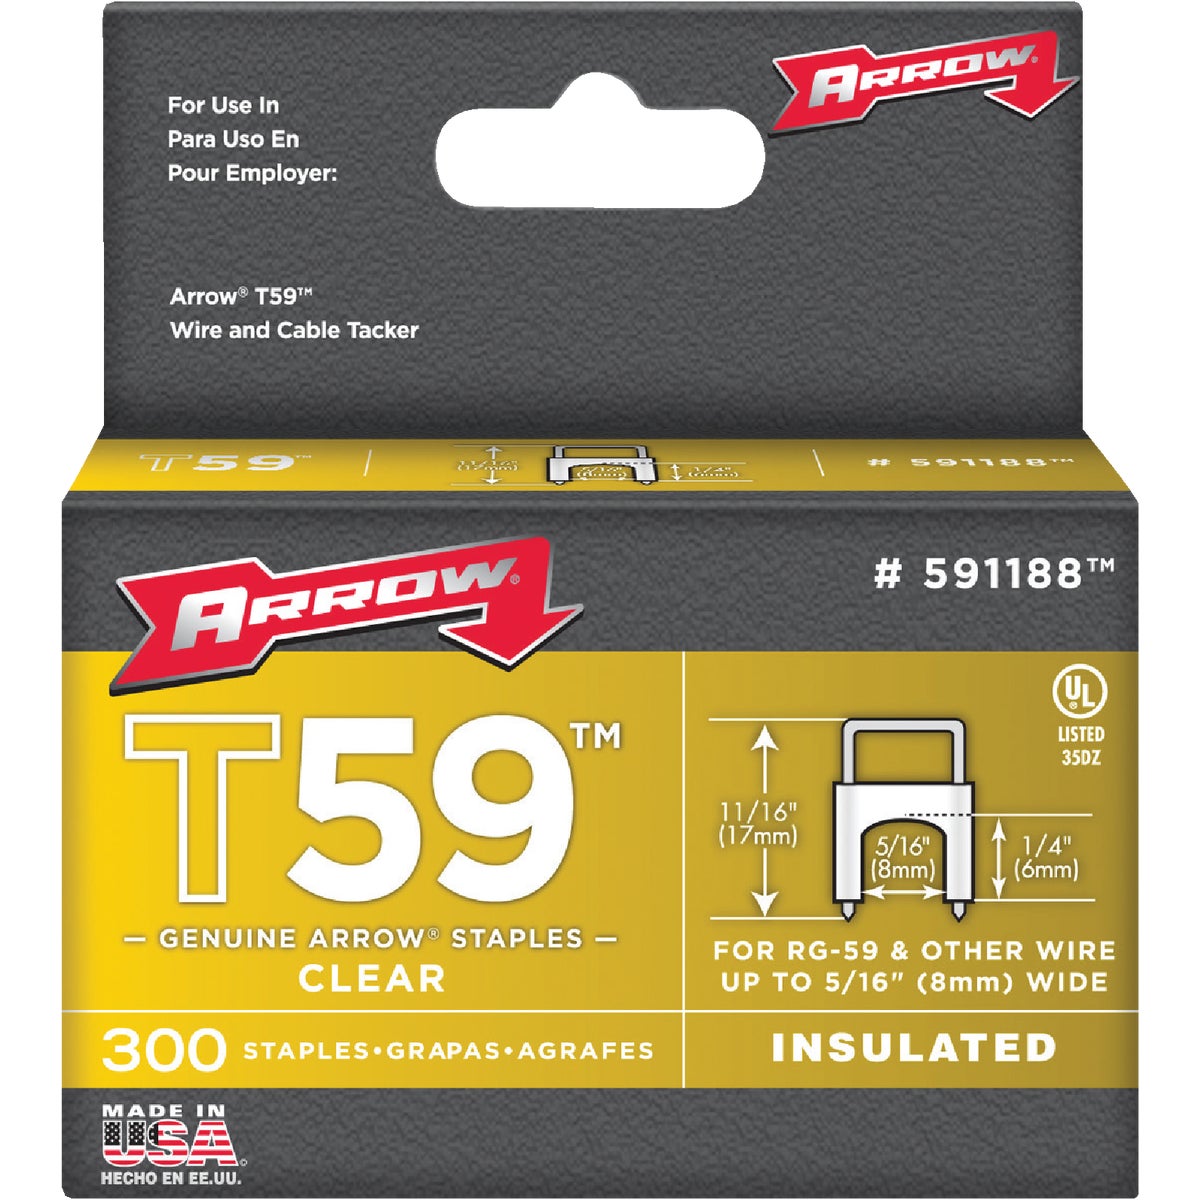 Item 357677, Arrow T59 Insulated Cable Staple for use with Arrow staple gun.